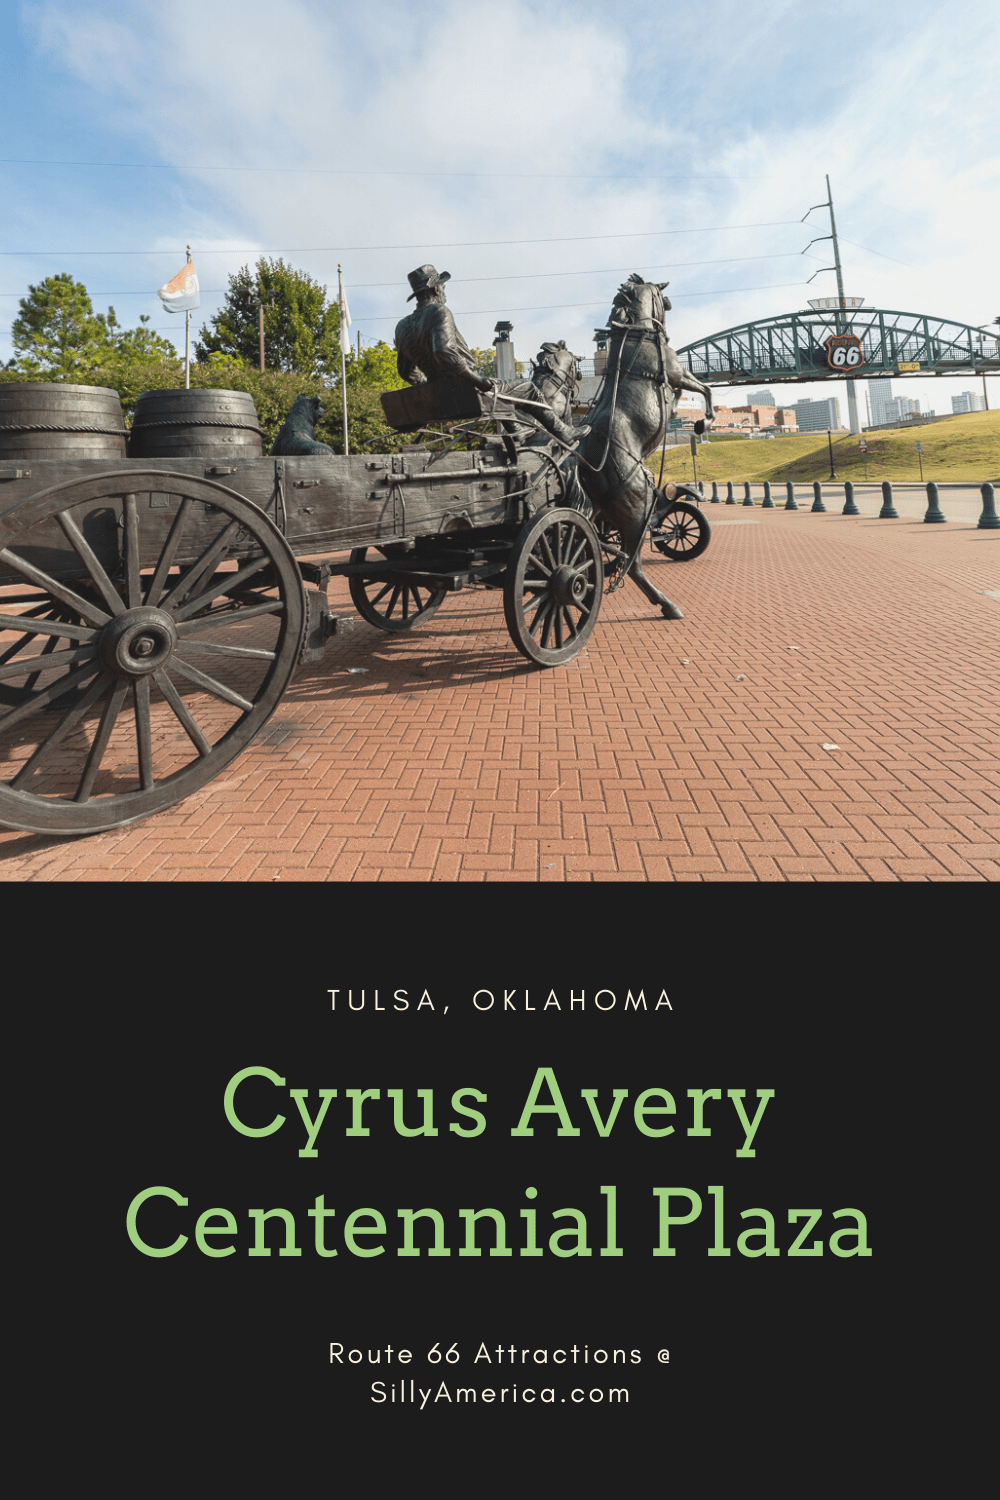 Cyrus Avery is known as the father of Route 66. He created the route while a member of the board appointed to create the Federal Highway System. His legacy is celebrated in Tulsa, Oklahoma at the Cyrus Avery Centennial Plaza.  #TULSA #TulsaOklahoma #RoadTrips #RoadTripStop #Route66 #Route66RoadTrip #OklahomaRoute66 #Oklahoma #OklahomaRoadTrip #OklahomaRoadsideAttractions #RoadsideAttractions #RoadsideAttraction #RoadsideAmerica #RoadTrip